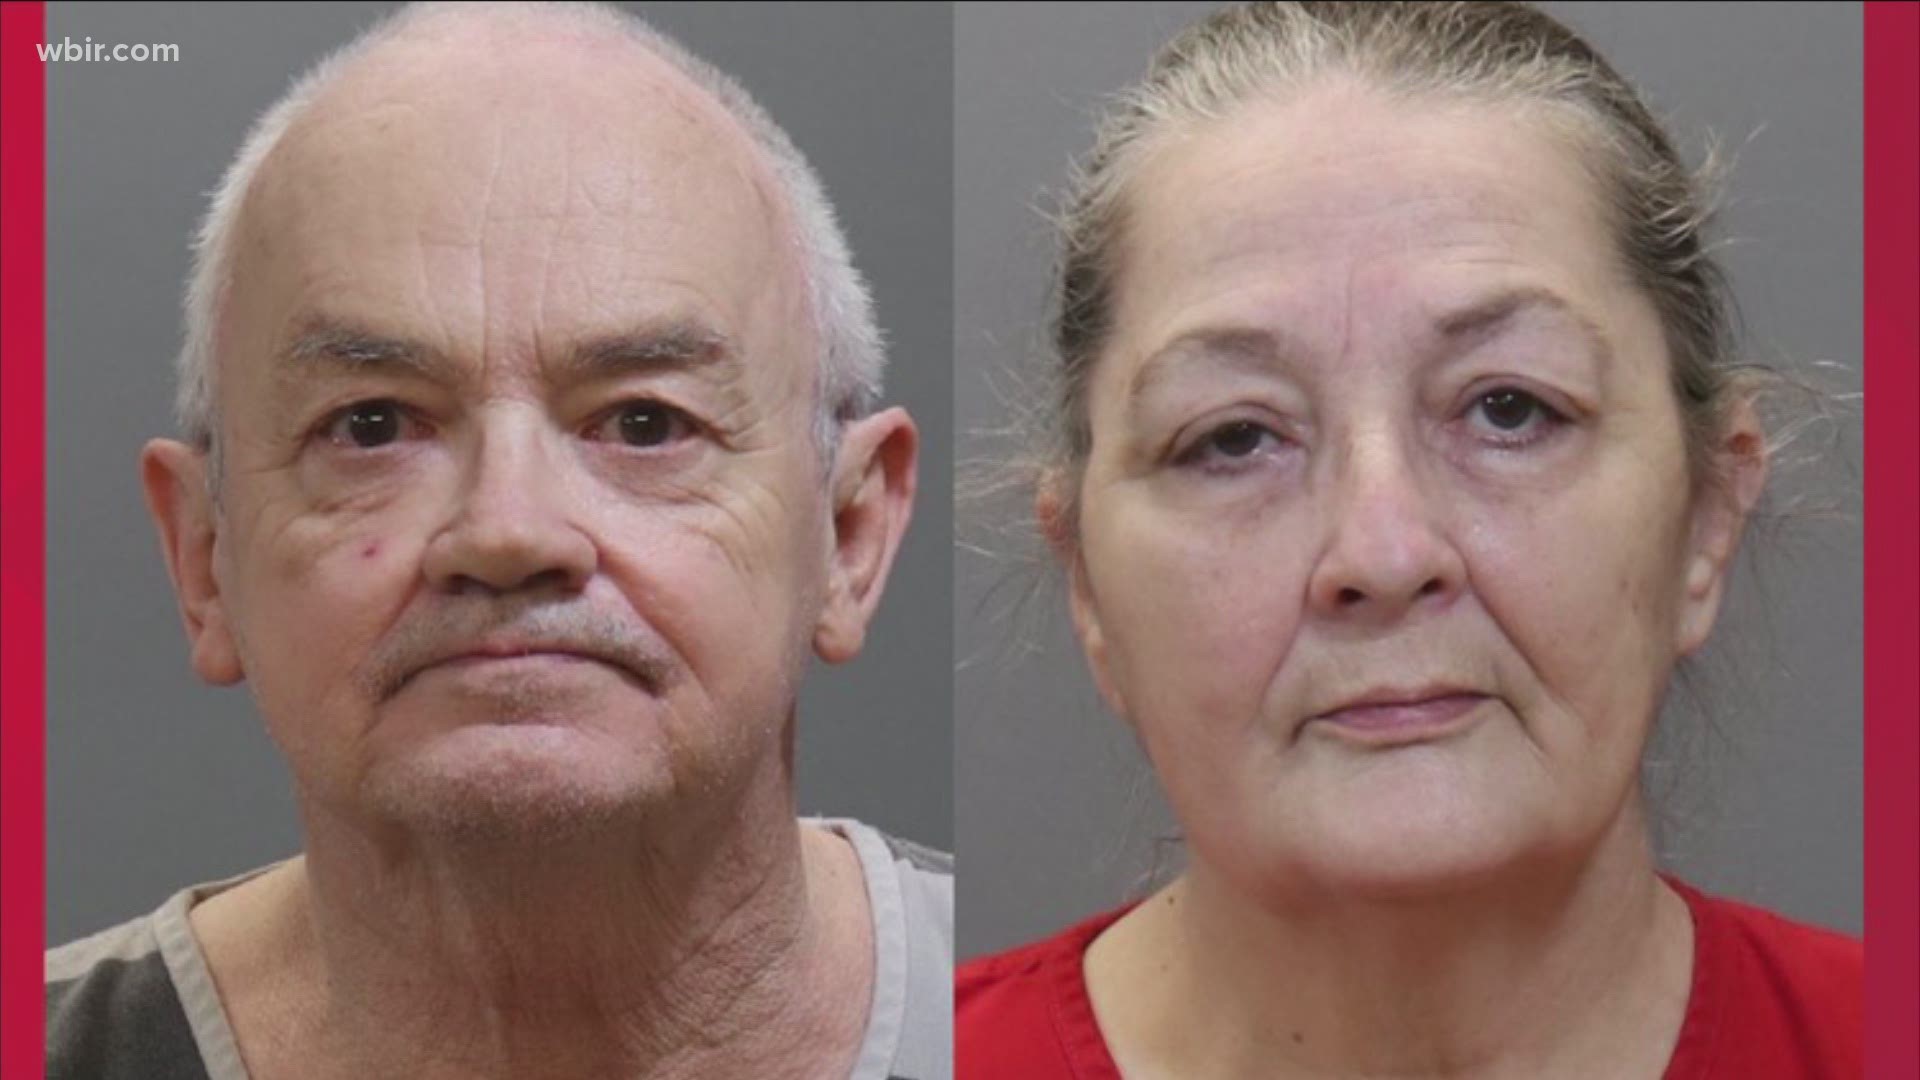 Prosecutors said they plan to seek the death penalty for a Roane County couple accused in a horrific child abuse case that spanned two counties.